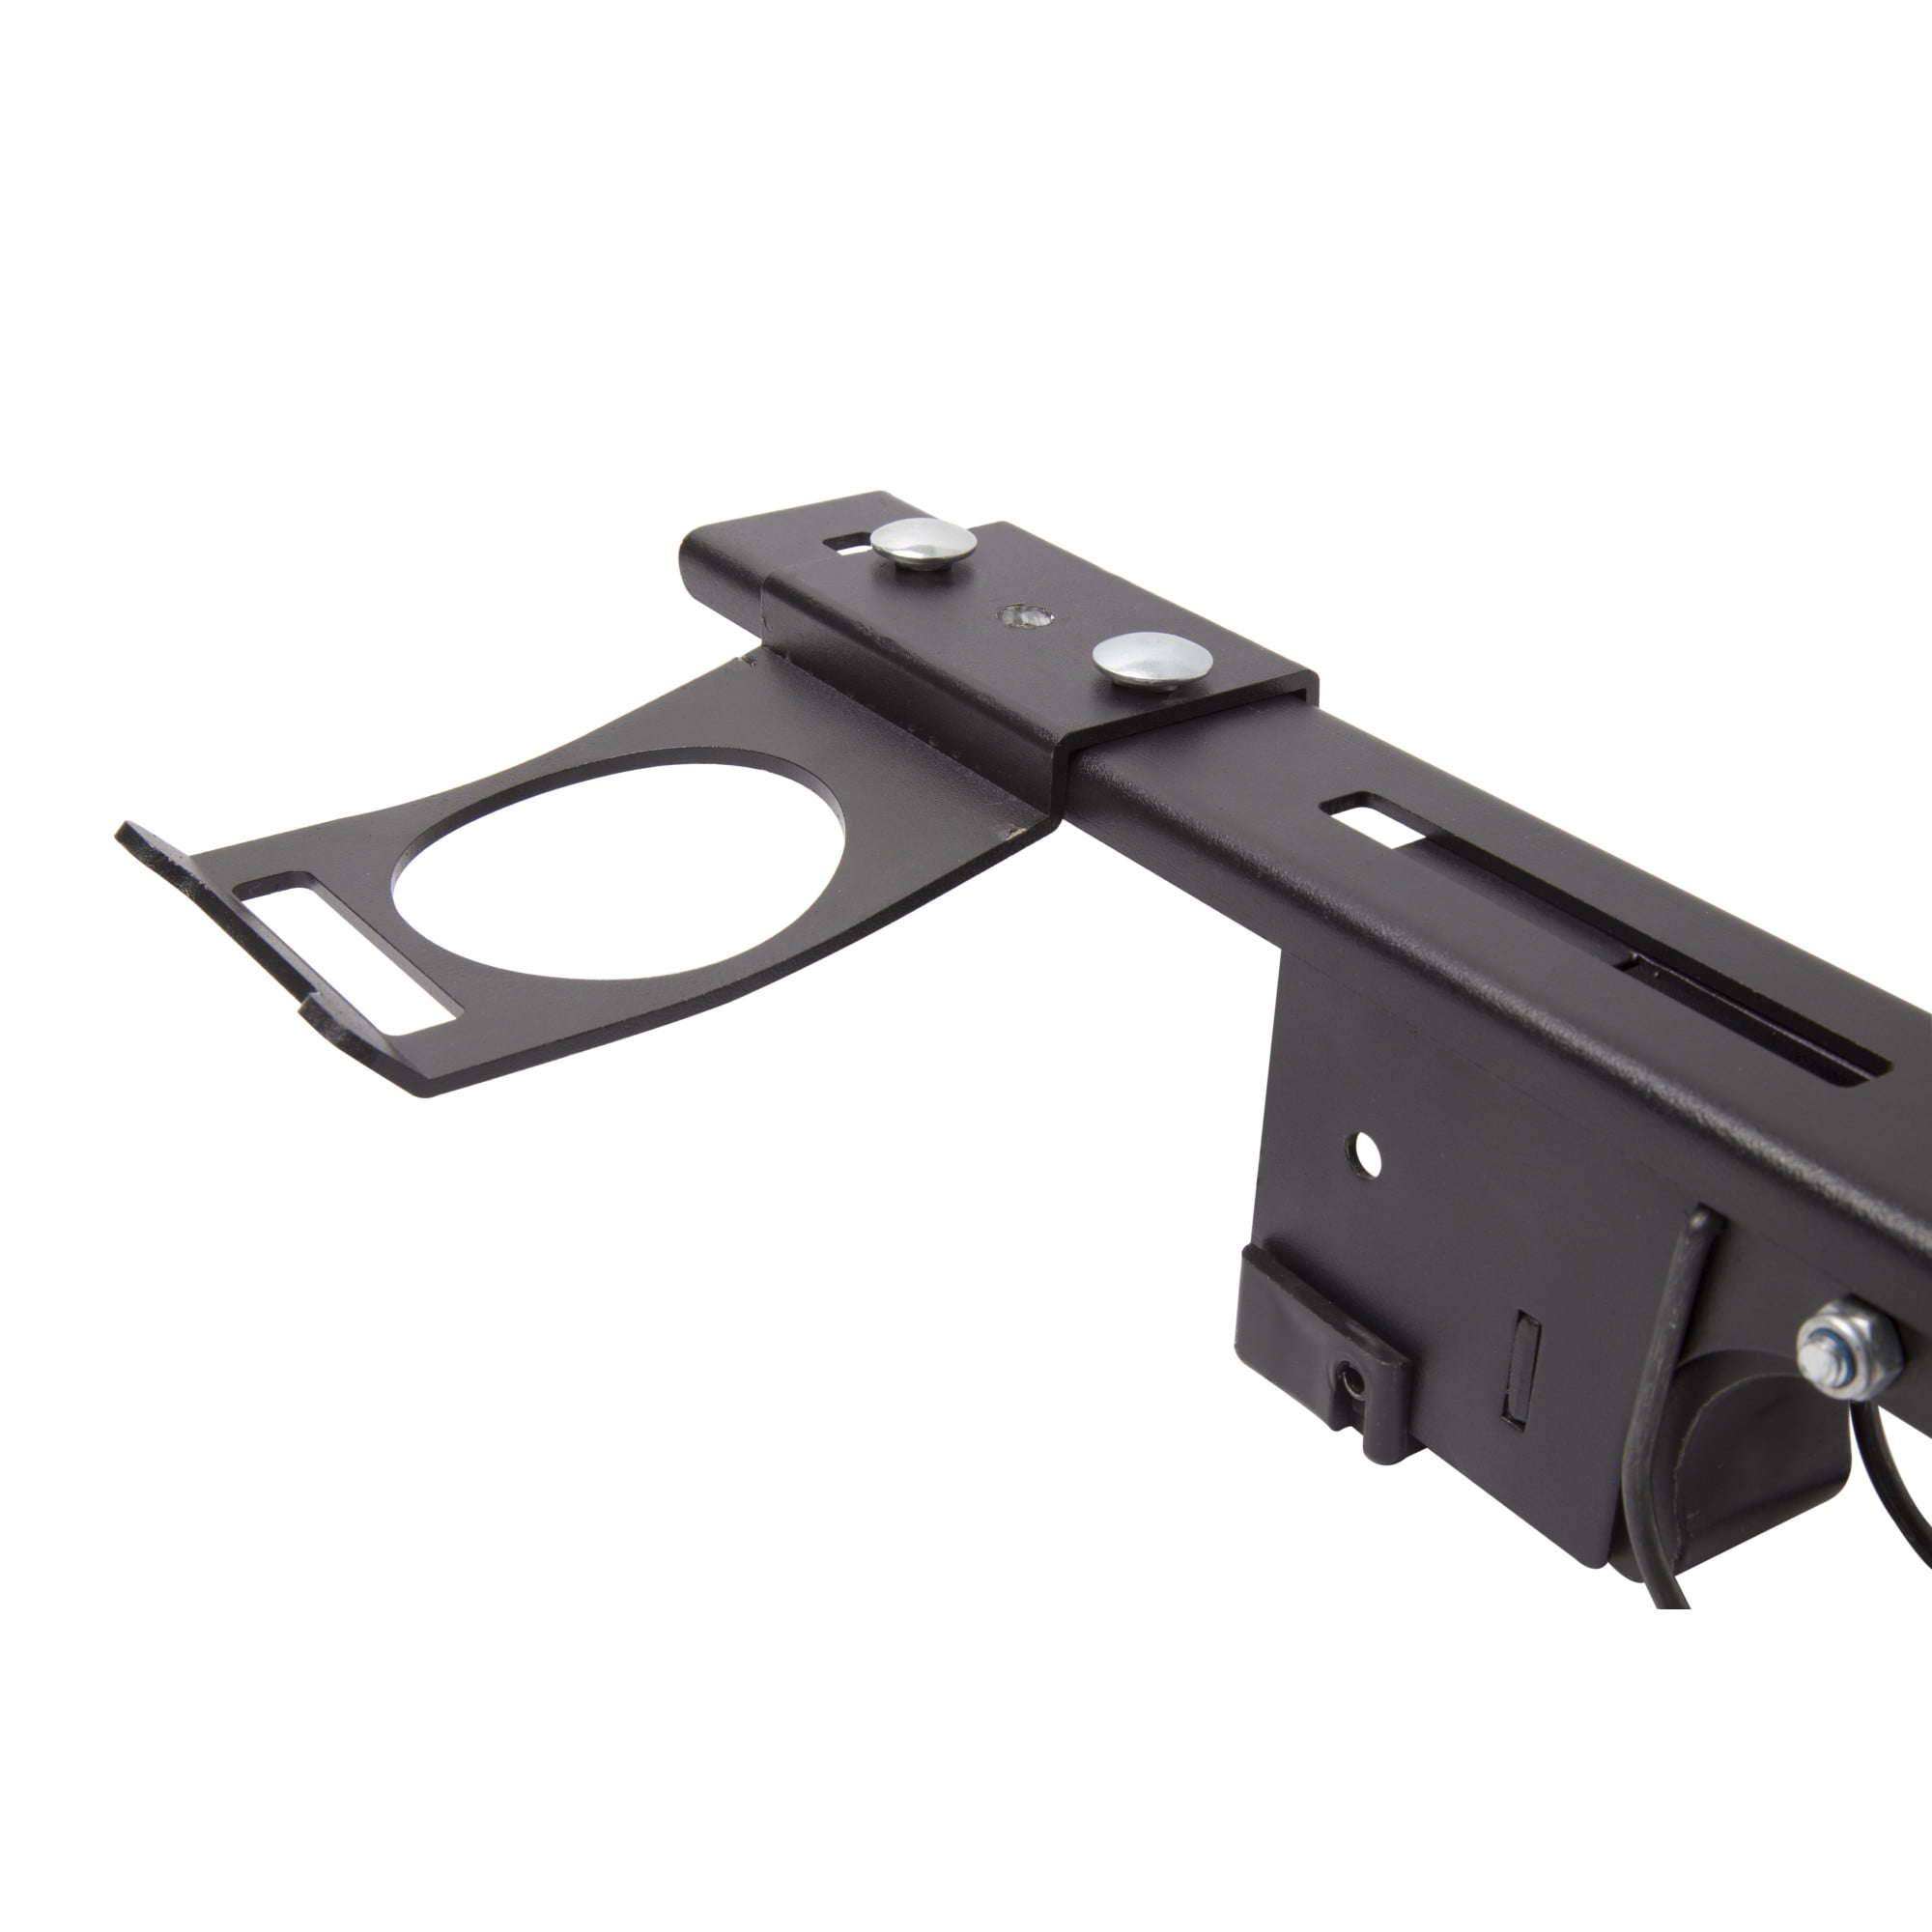 PROTOCOL Equipment 93360 Tool Mount Assembly Brackets 1-Pair 